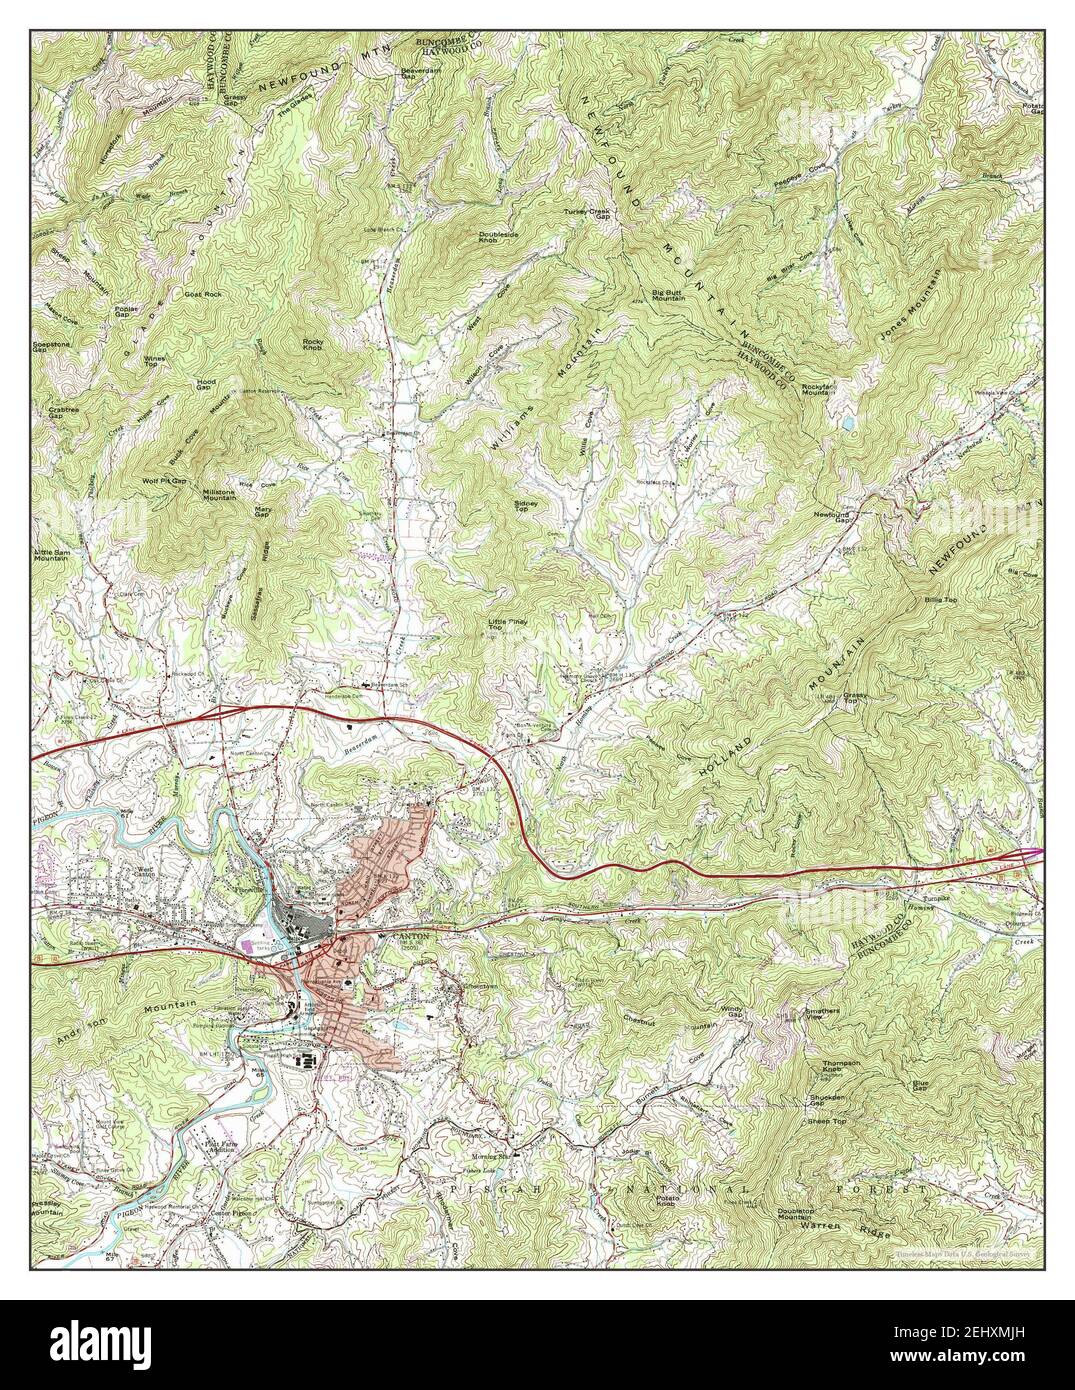 Canton North Carolina Map 1967 124000 United States Of America By Timeless Maps Data Us Geological Survey 2EHXMJH 